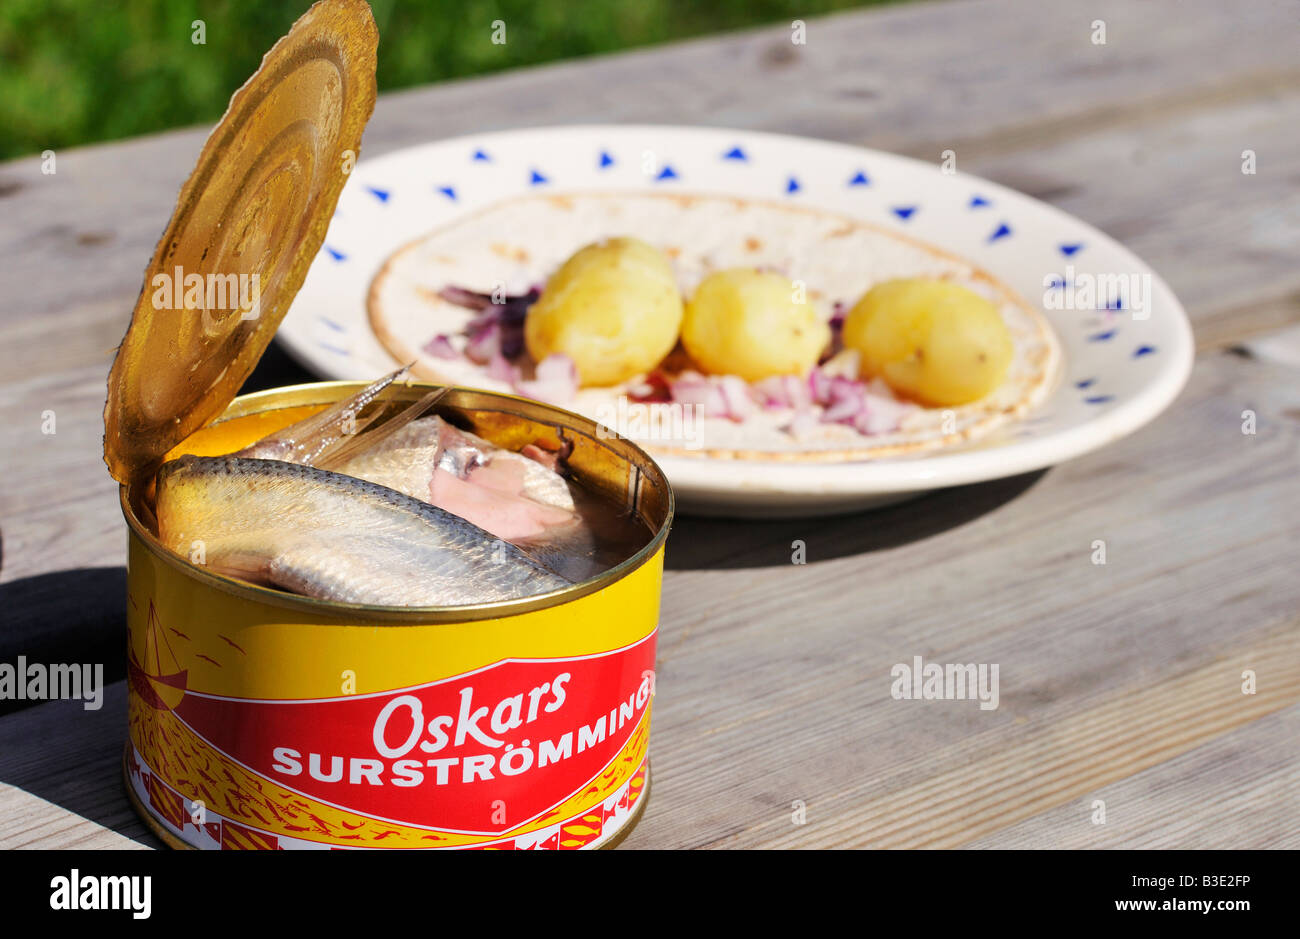 Buy Surströmming - Delicacy from Sweden 